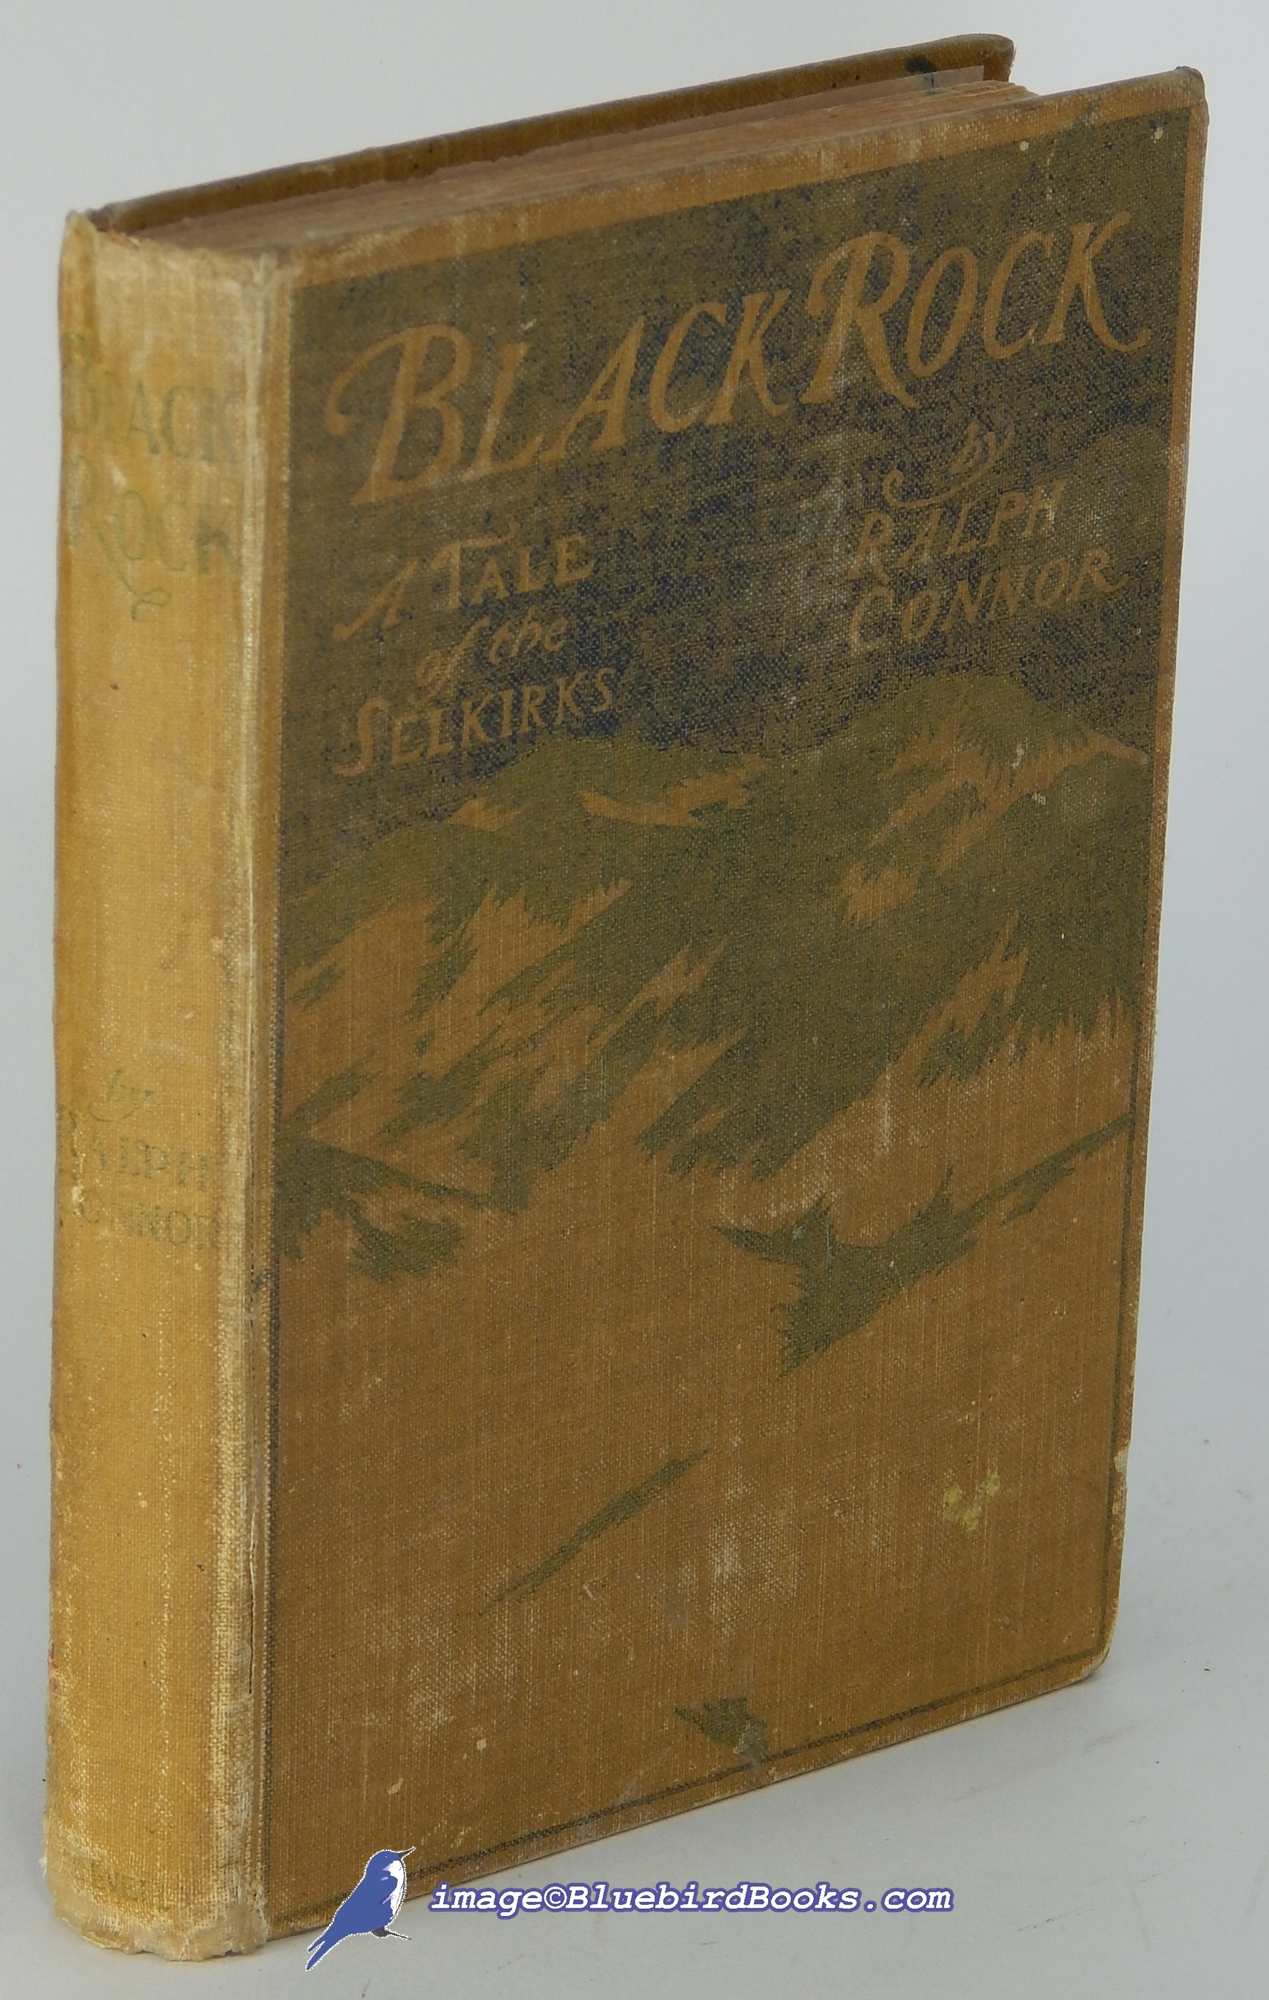 CONNOR, RALPH - Black Rock: A Tale of the Selkirks